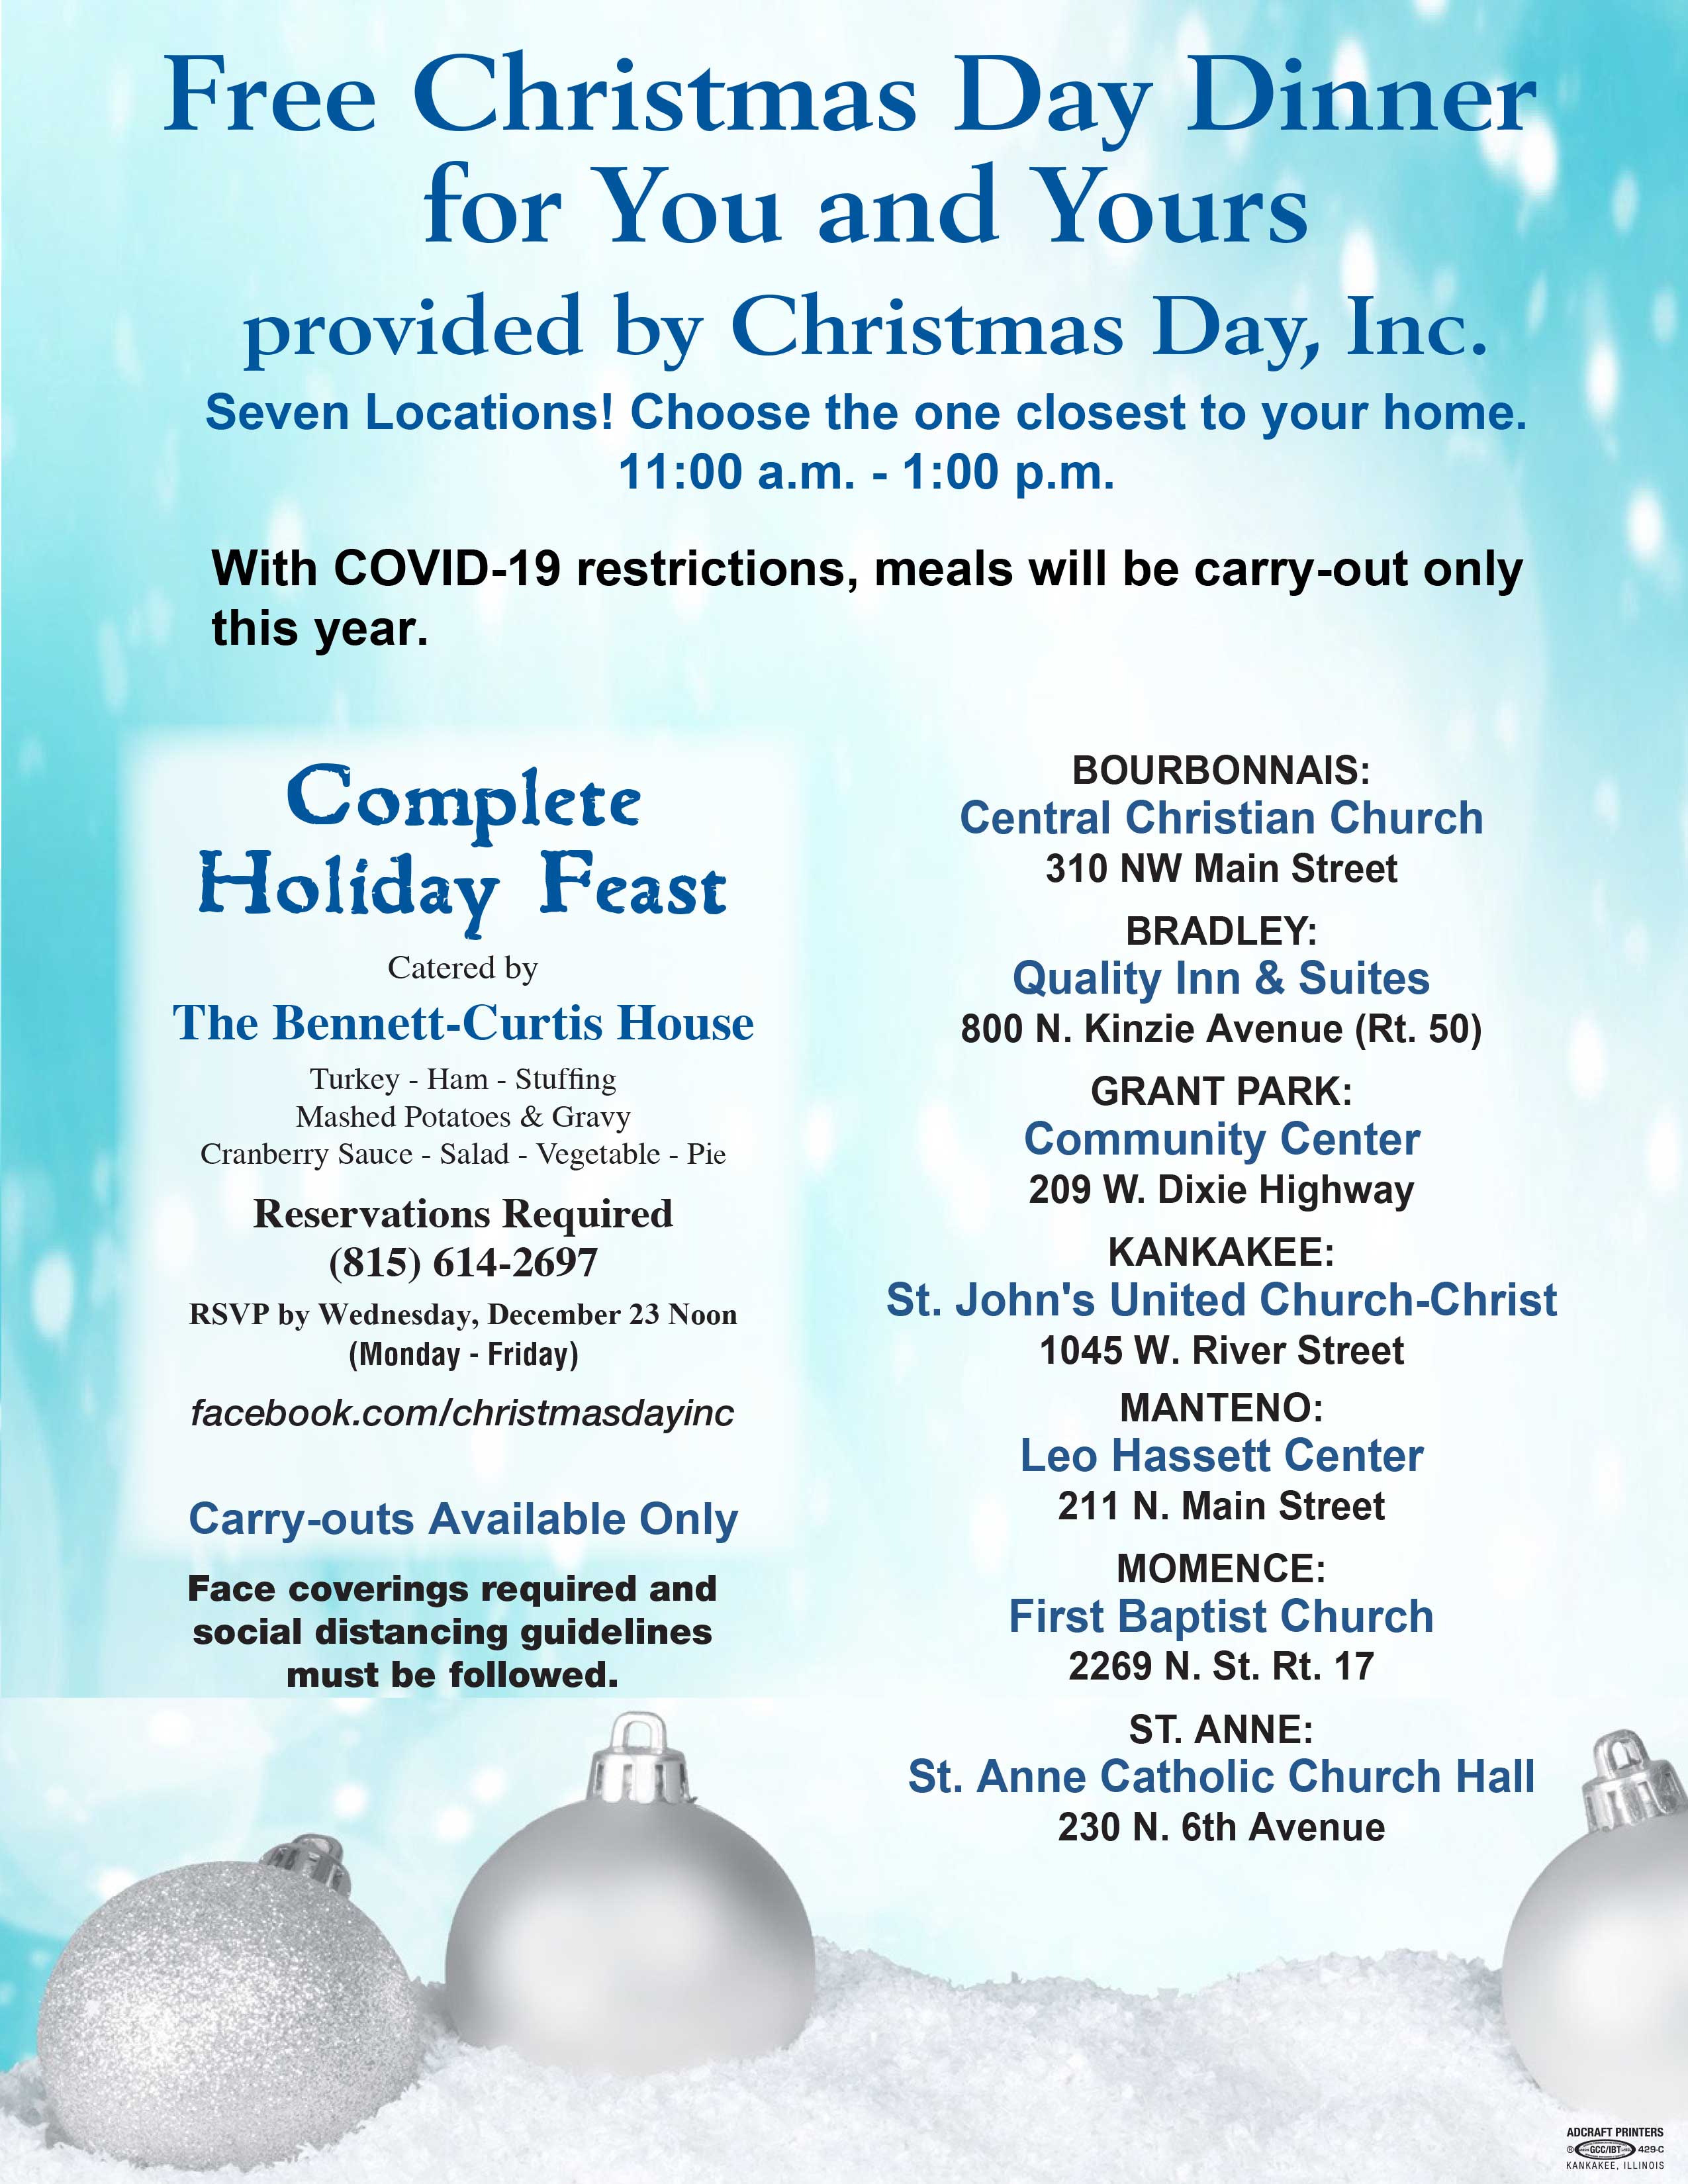 Free Christmas Day Dinner for You and Yours provided by Christmas Day, Inc.